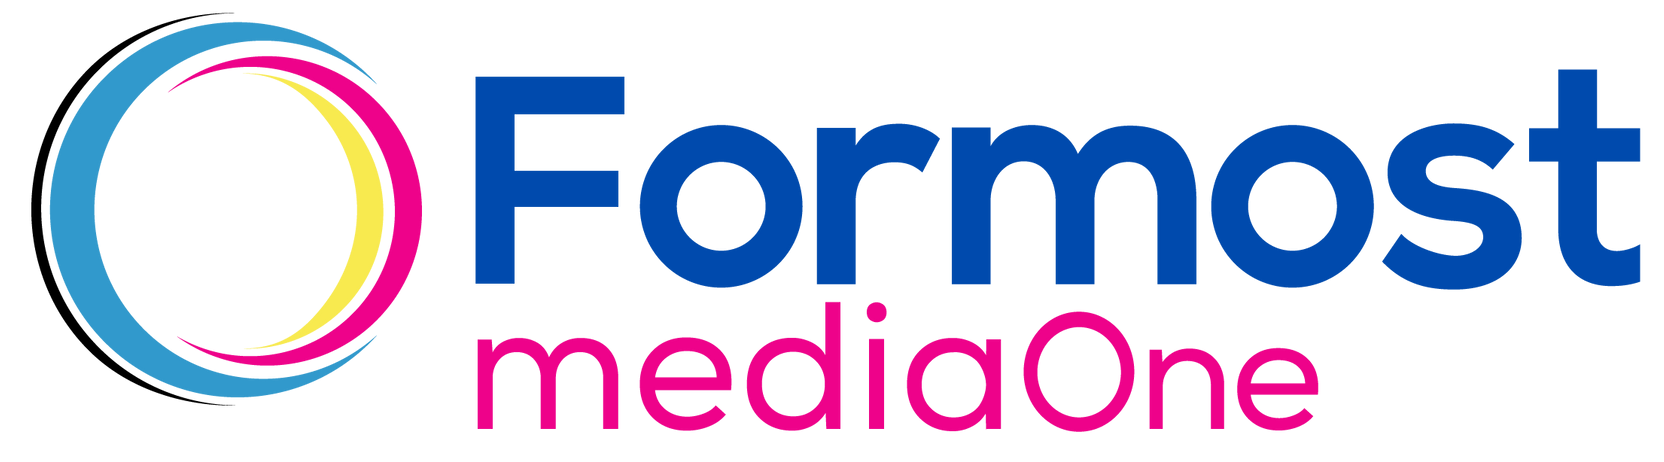 the logo for formost mediaone is blue and pink .